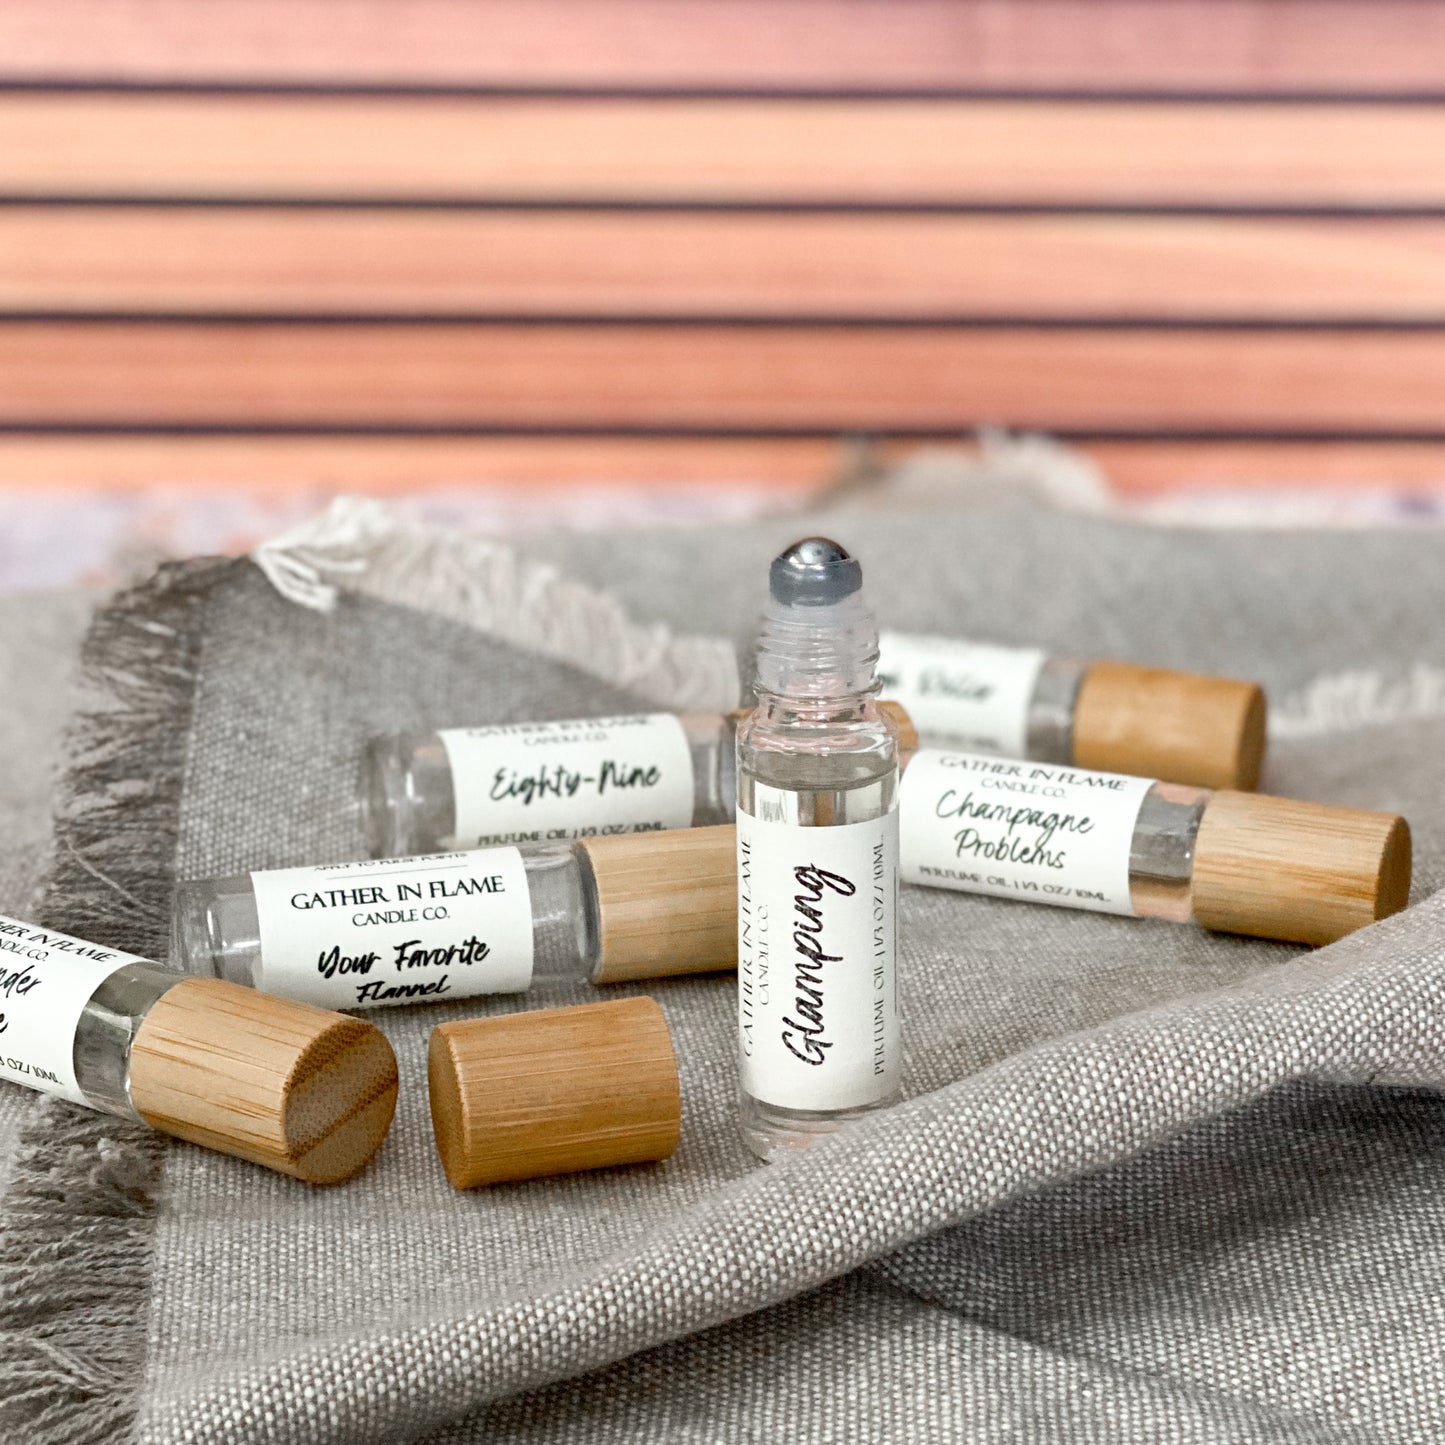 Your Favorite Flannel Perfume Oil Roller